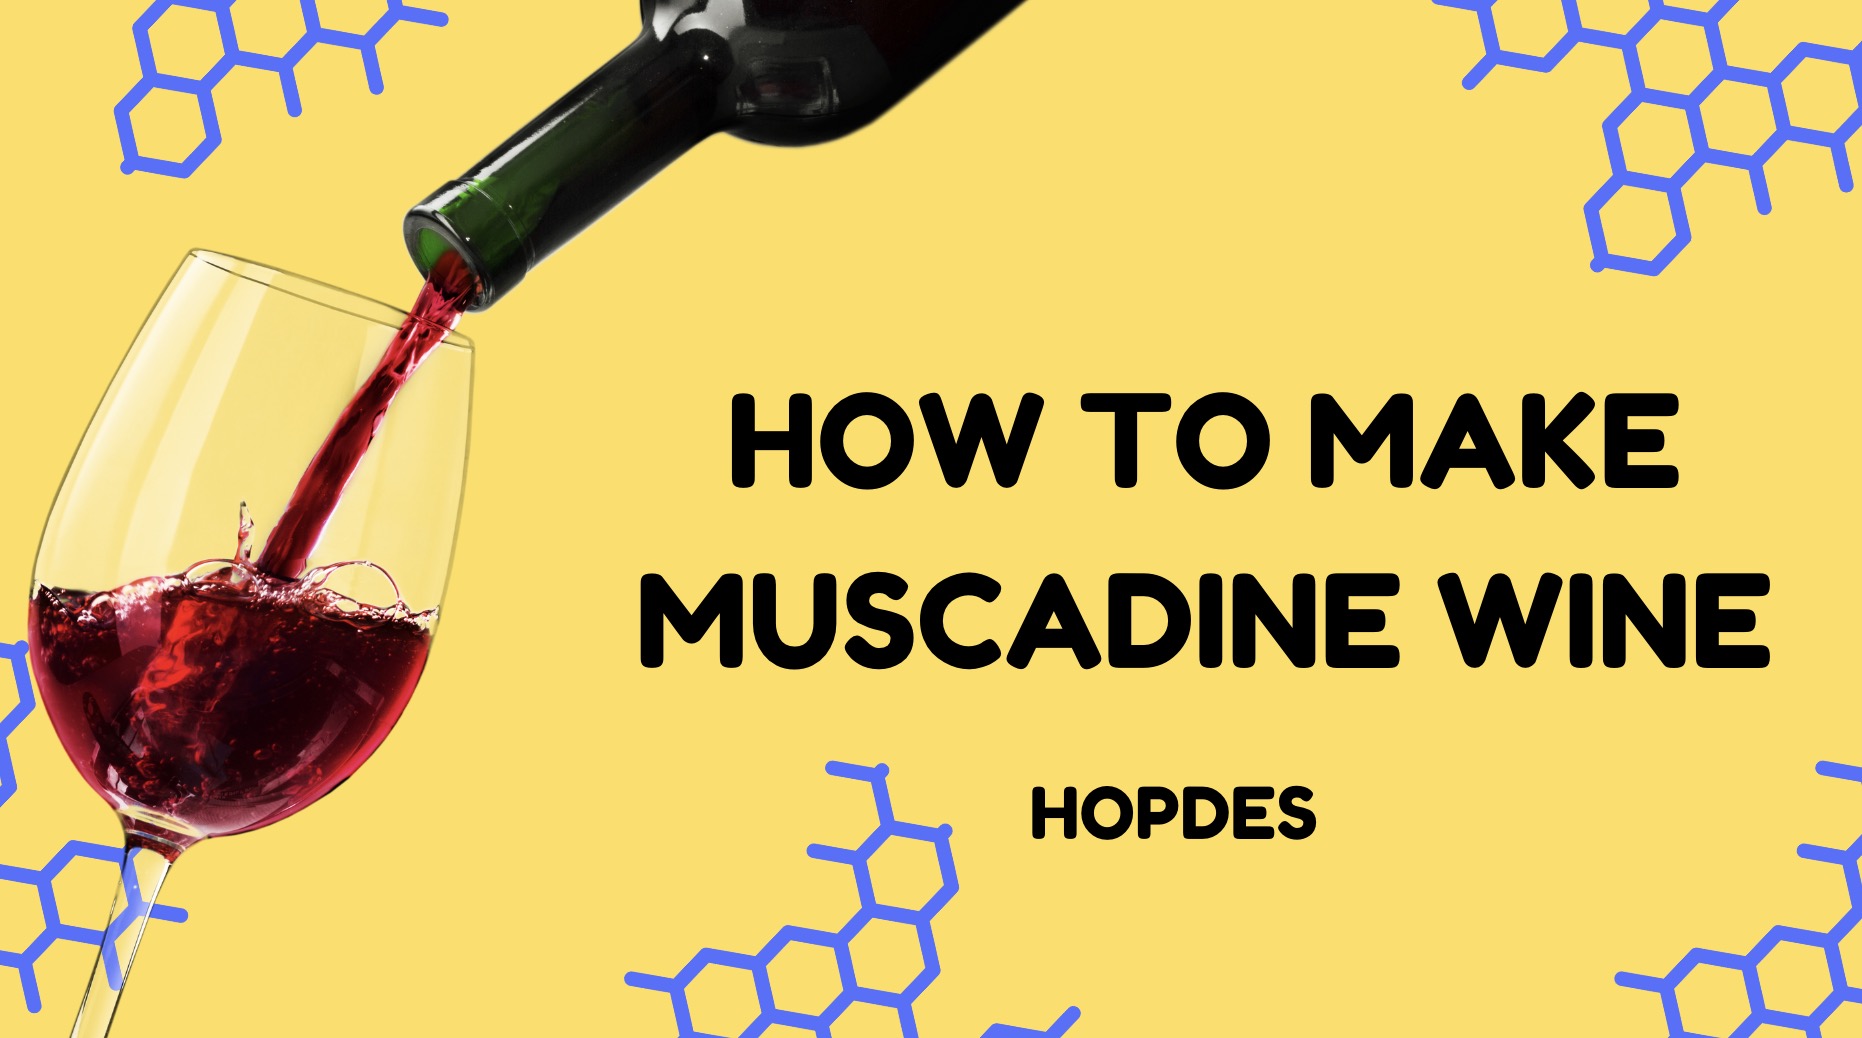 How to Make Muscadine Wine in 5 EASY Steps